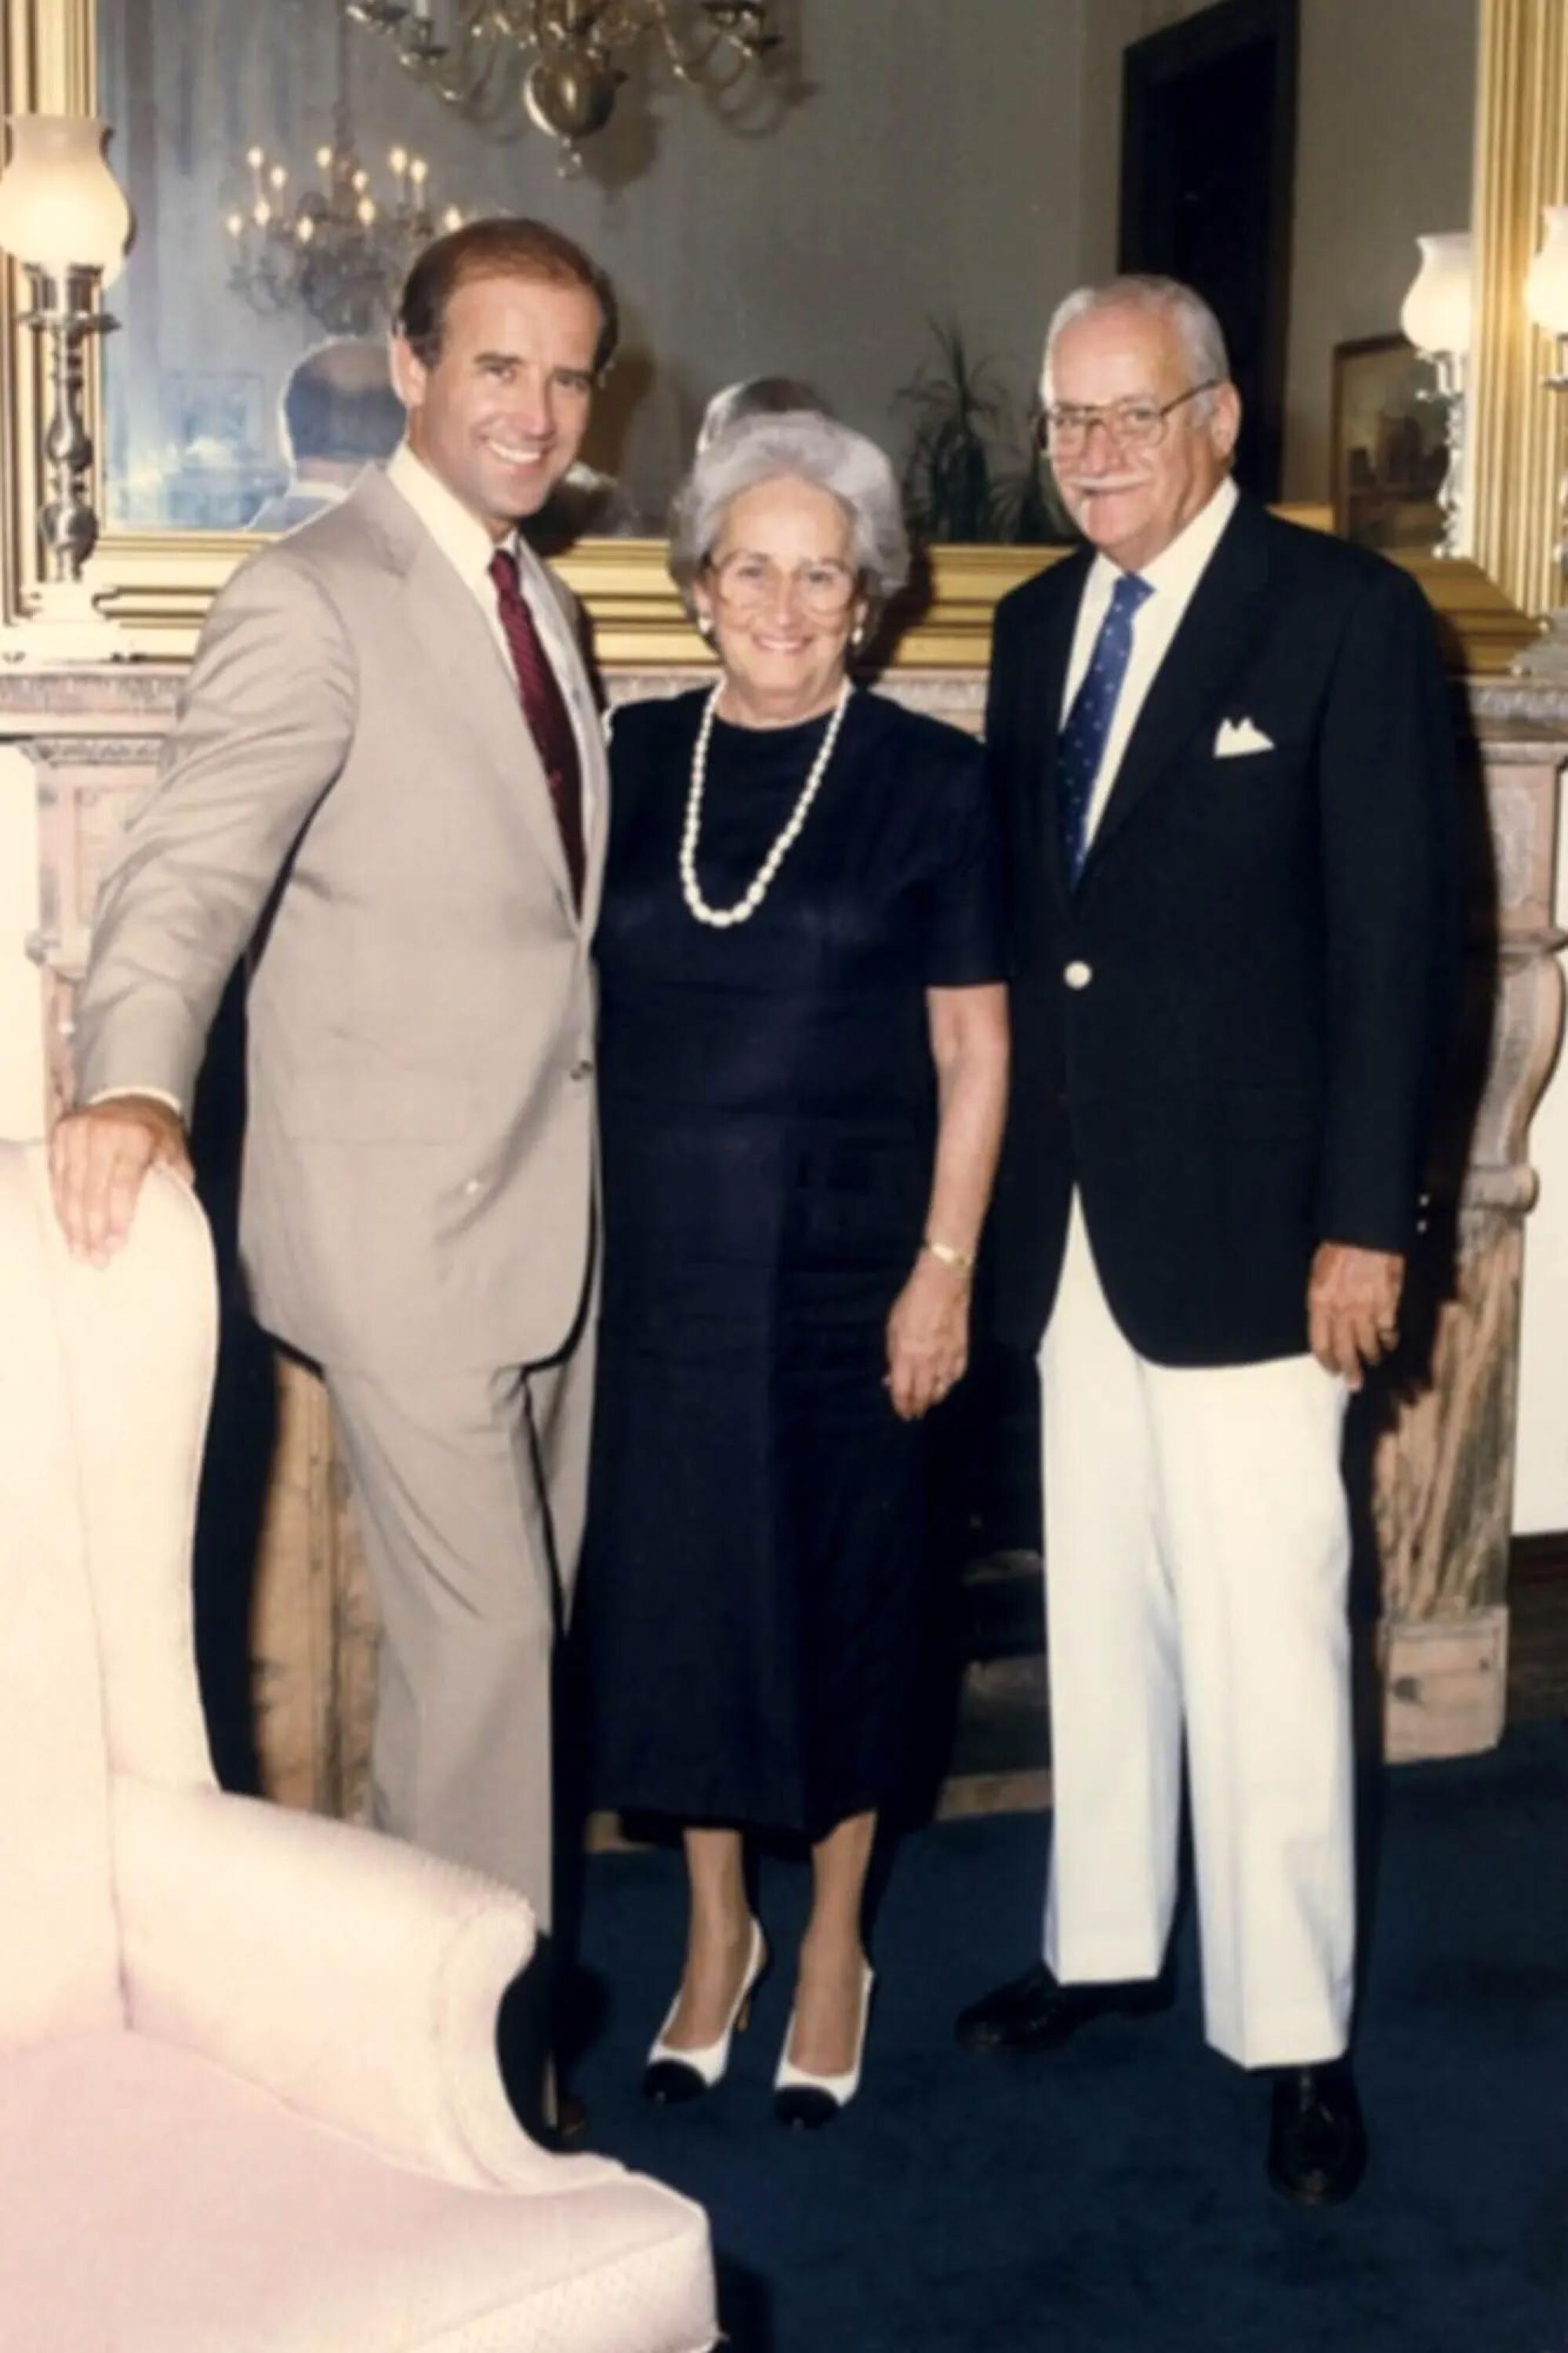 A man in a tan suit and tie, left, standing next to a woman in a dark dress and a man in a dark jacket and white pants. 